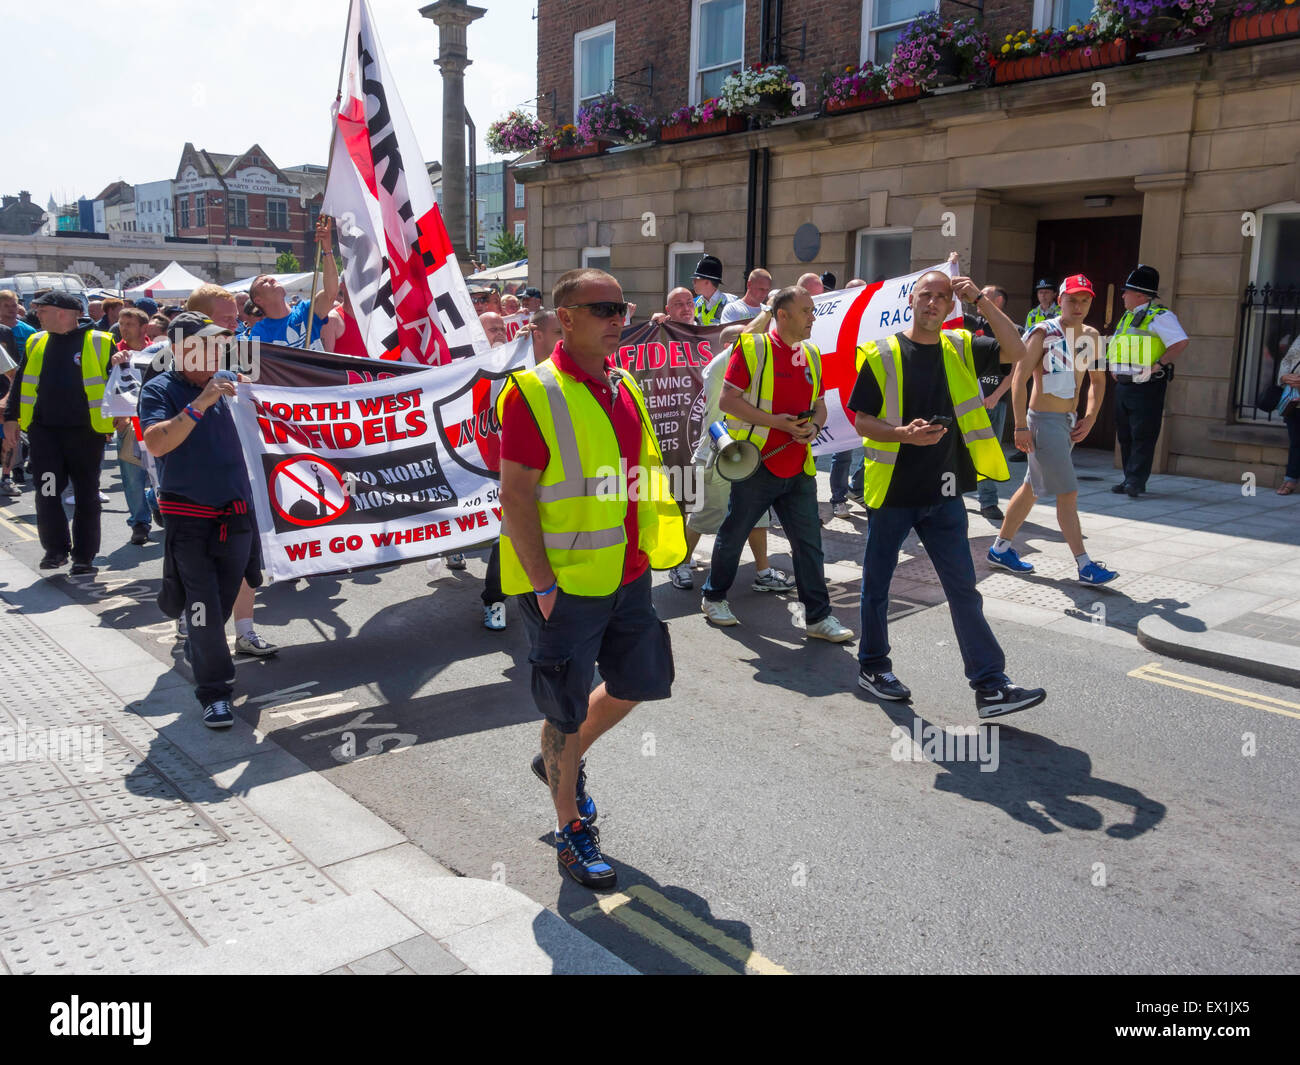 Stockton-on-Tees County Durham 4th July 2015,  A public demonstration by Far Right Anti-Muslim Groups 'North East Infidels' and 'North West Infidels' and an Anti Fascist counter-demonstration was held in the town centre today. Credit:  Peter Jordan NE/Alamy Live News Stock Photo